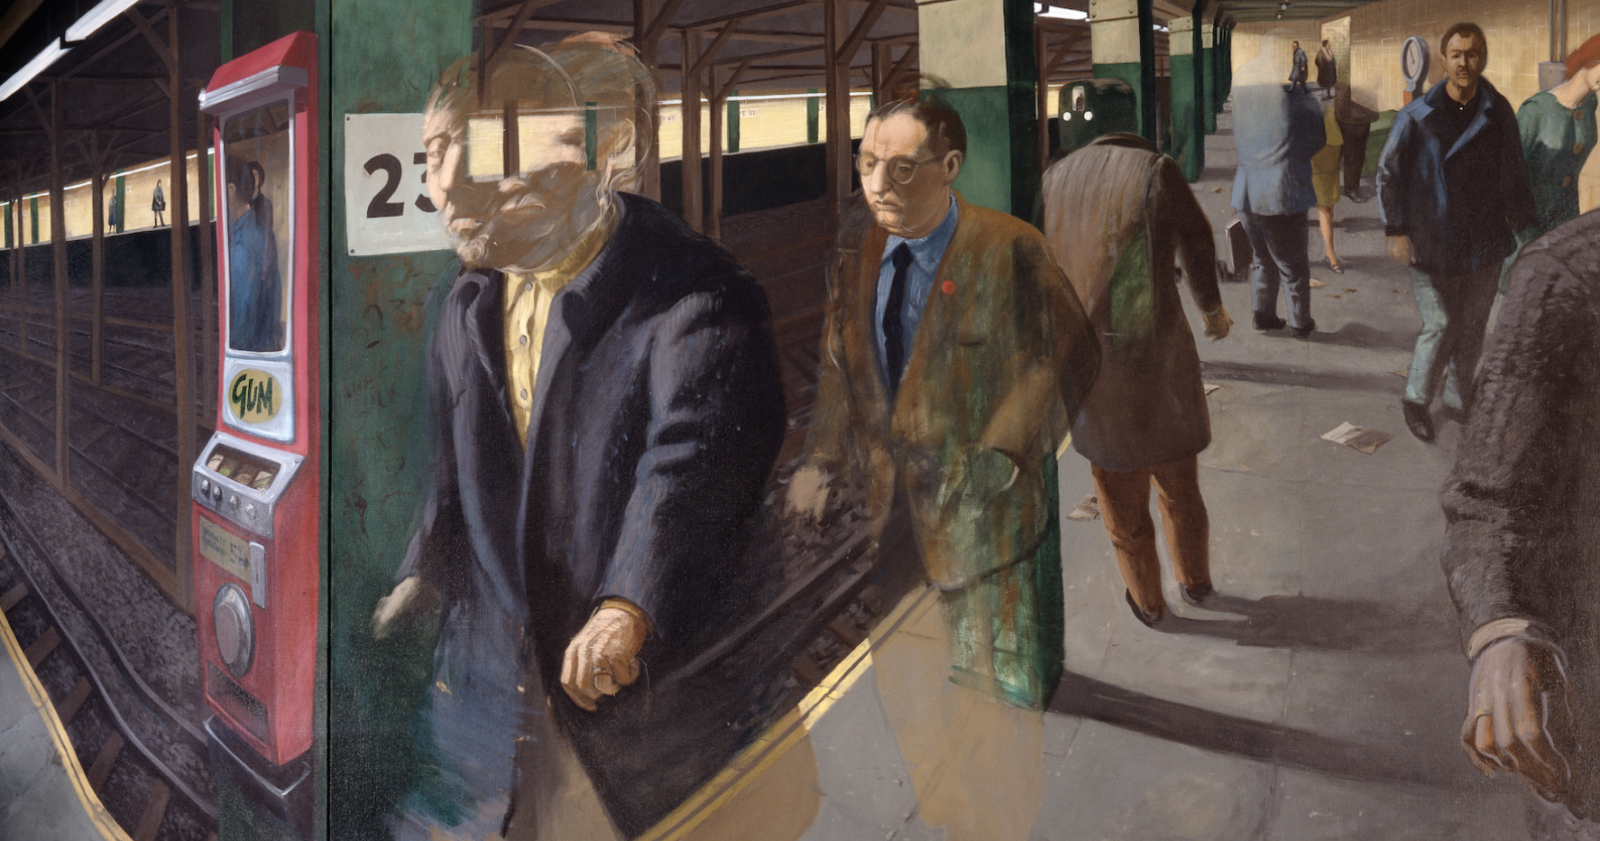 Painting of a florescently-lit subway platform with riders coming and going. The way the figures are depicted has a surreal quality to it, with one man's head, for instance, treated as if it were a window and transparent, through which one sees the structural elements of the station behind him.